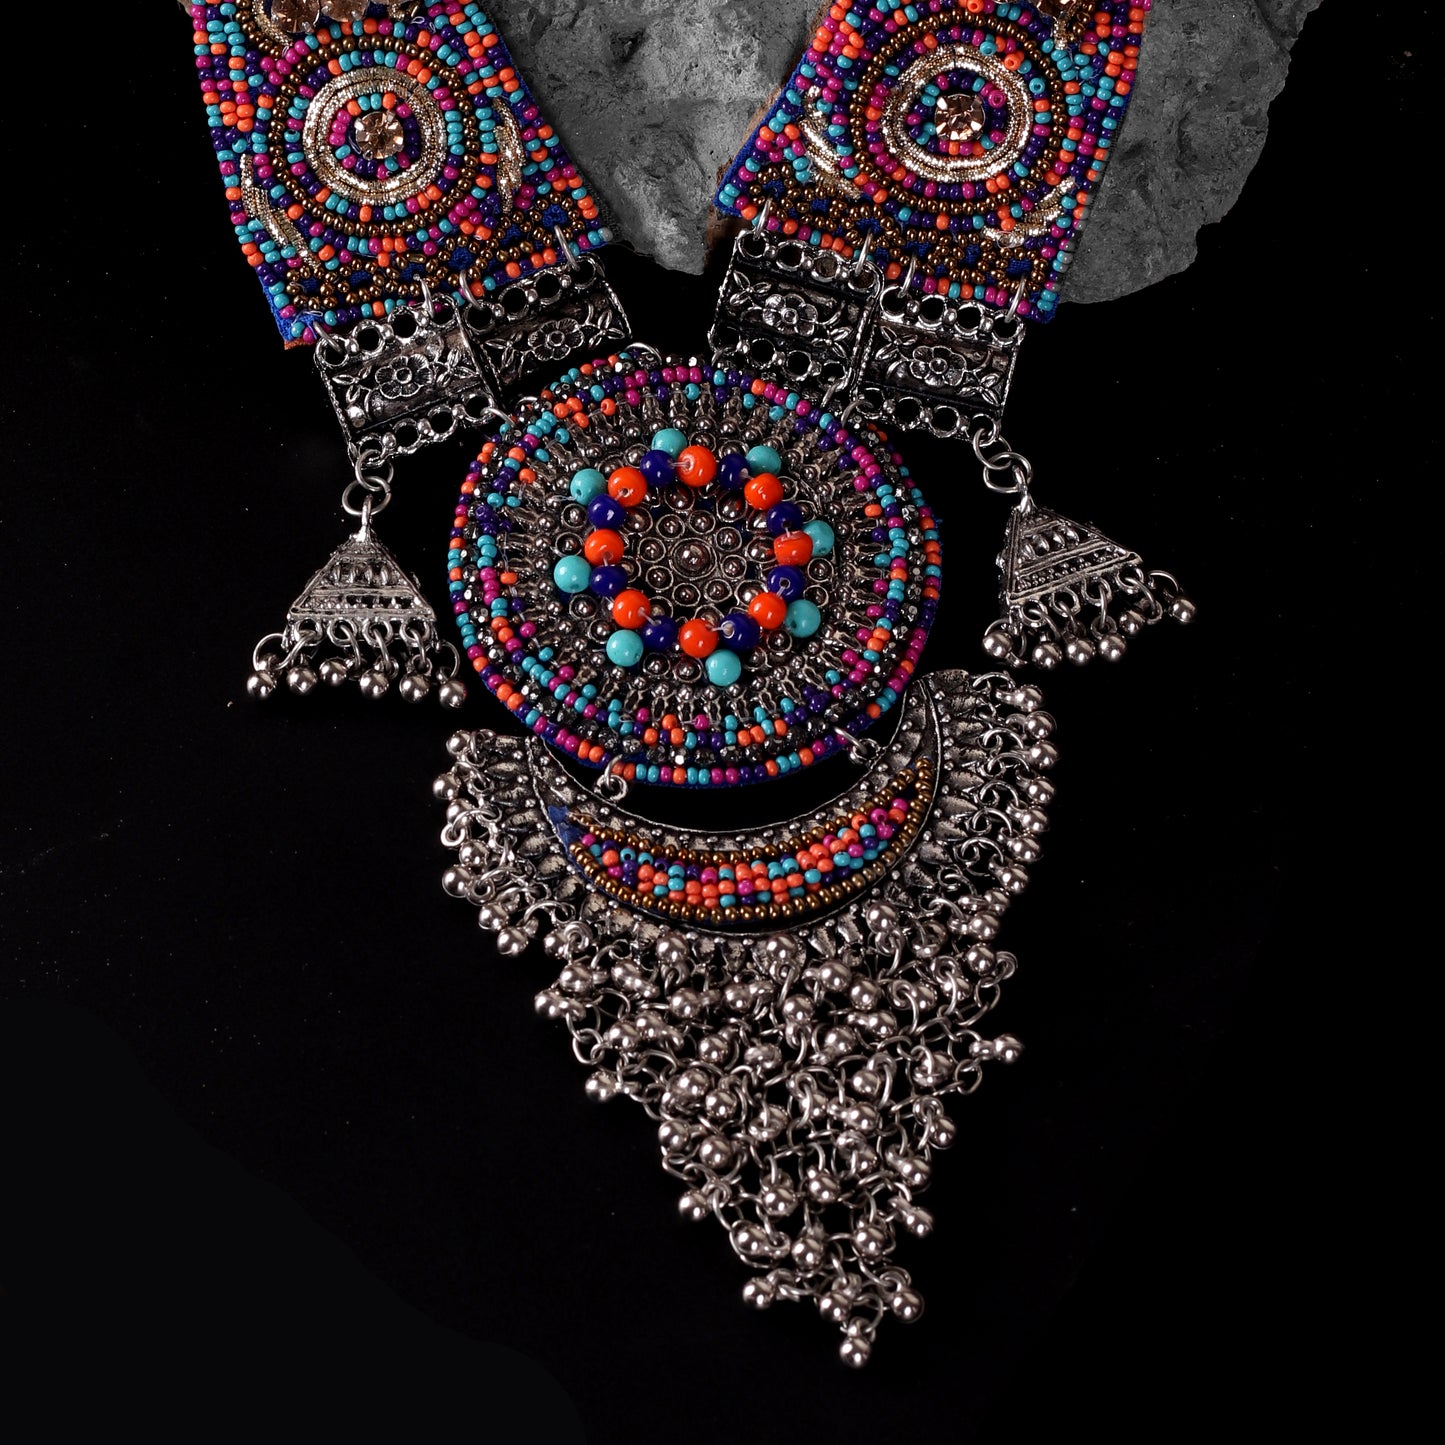 The Picasso Art Necklace in Multicolor